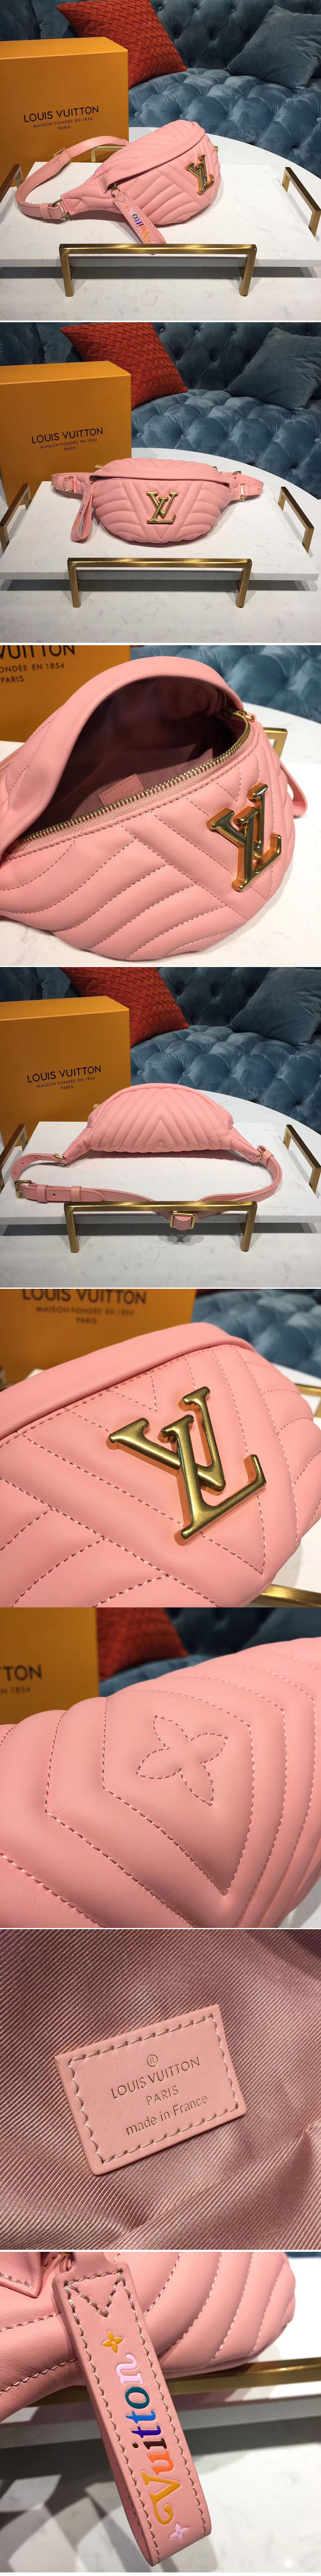 Replica Louis Vuitton M53750 LV New Wave Bumbag Pink Leather